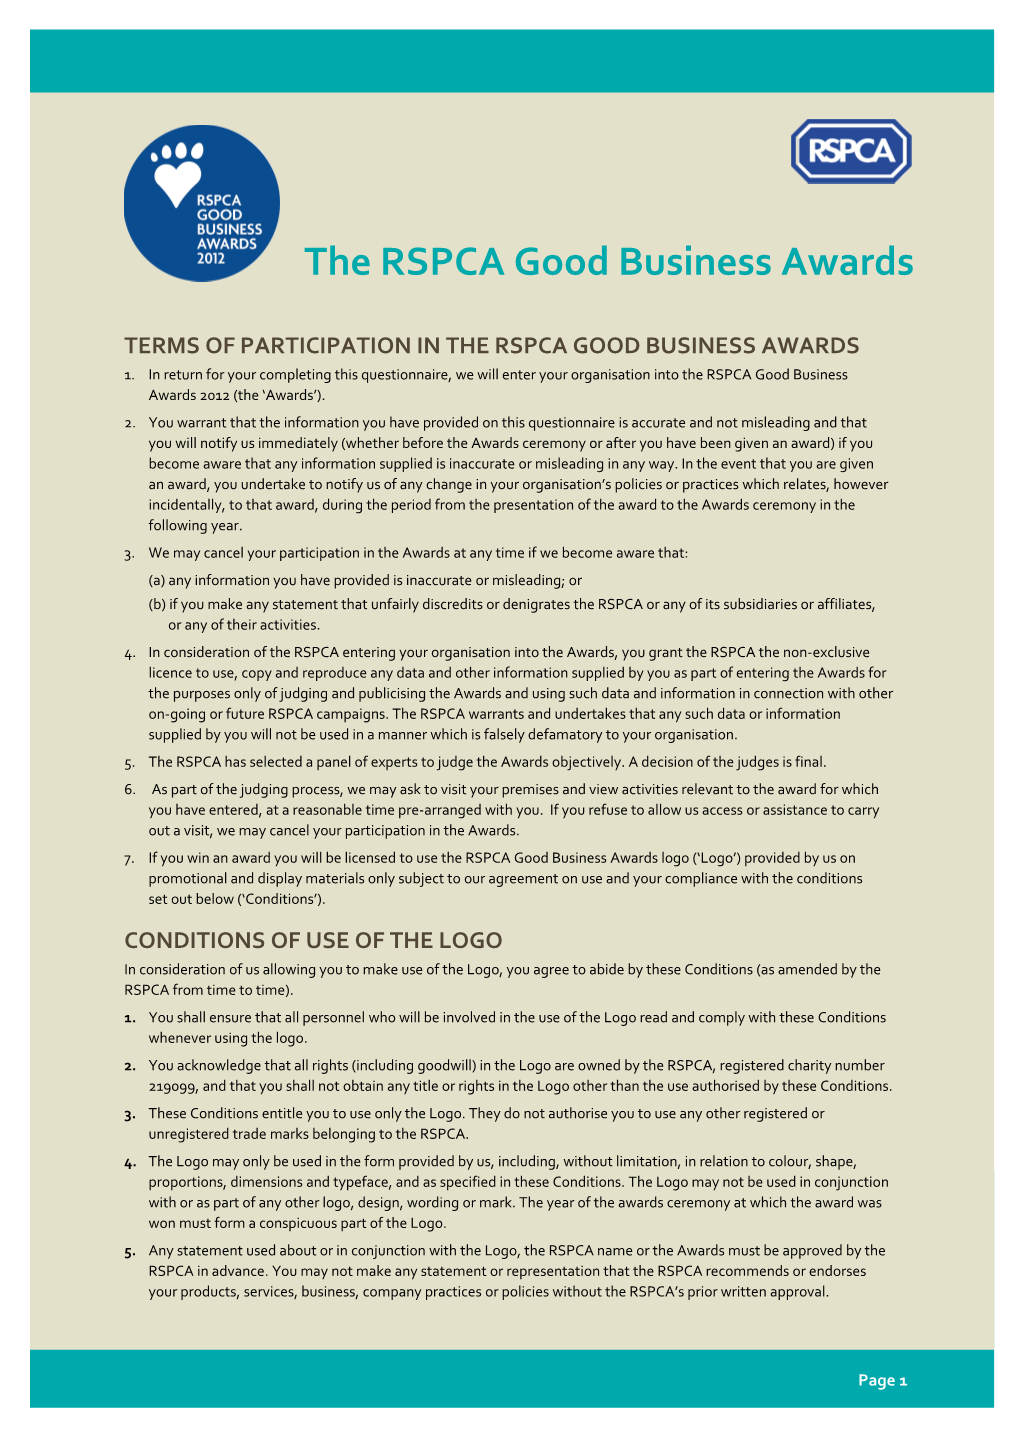 Terms of Participation in the Rspca Good Business Awards